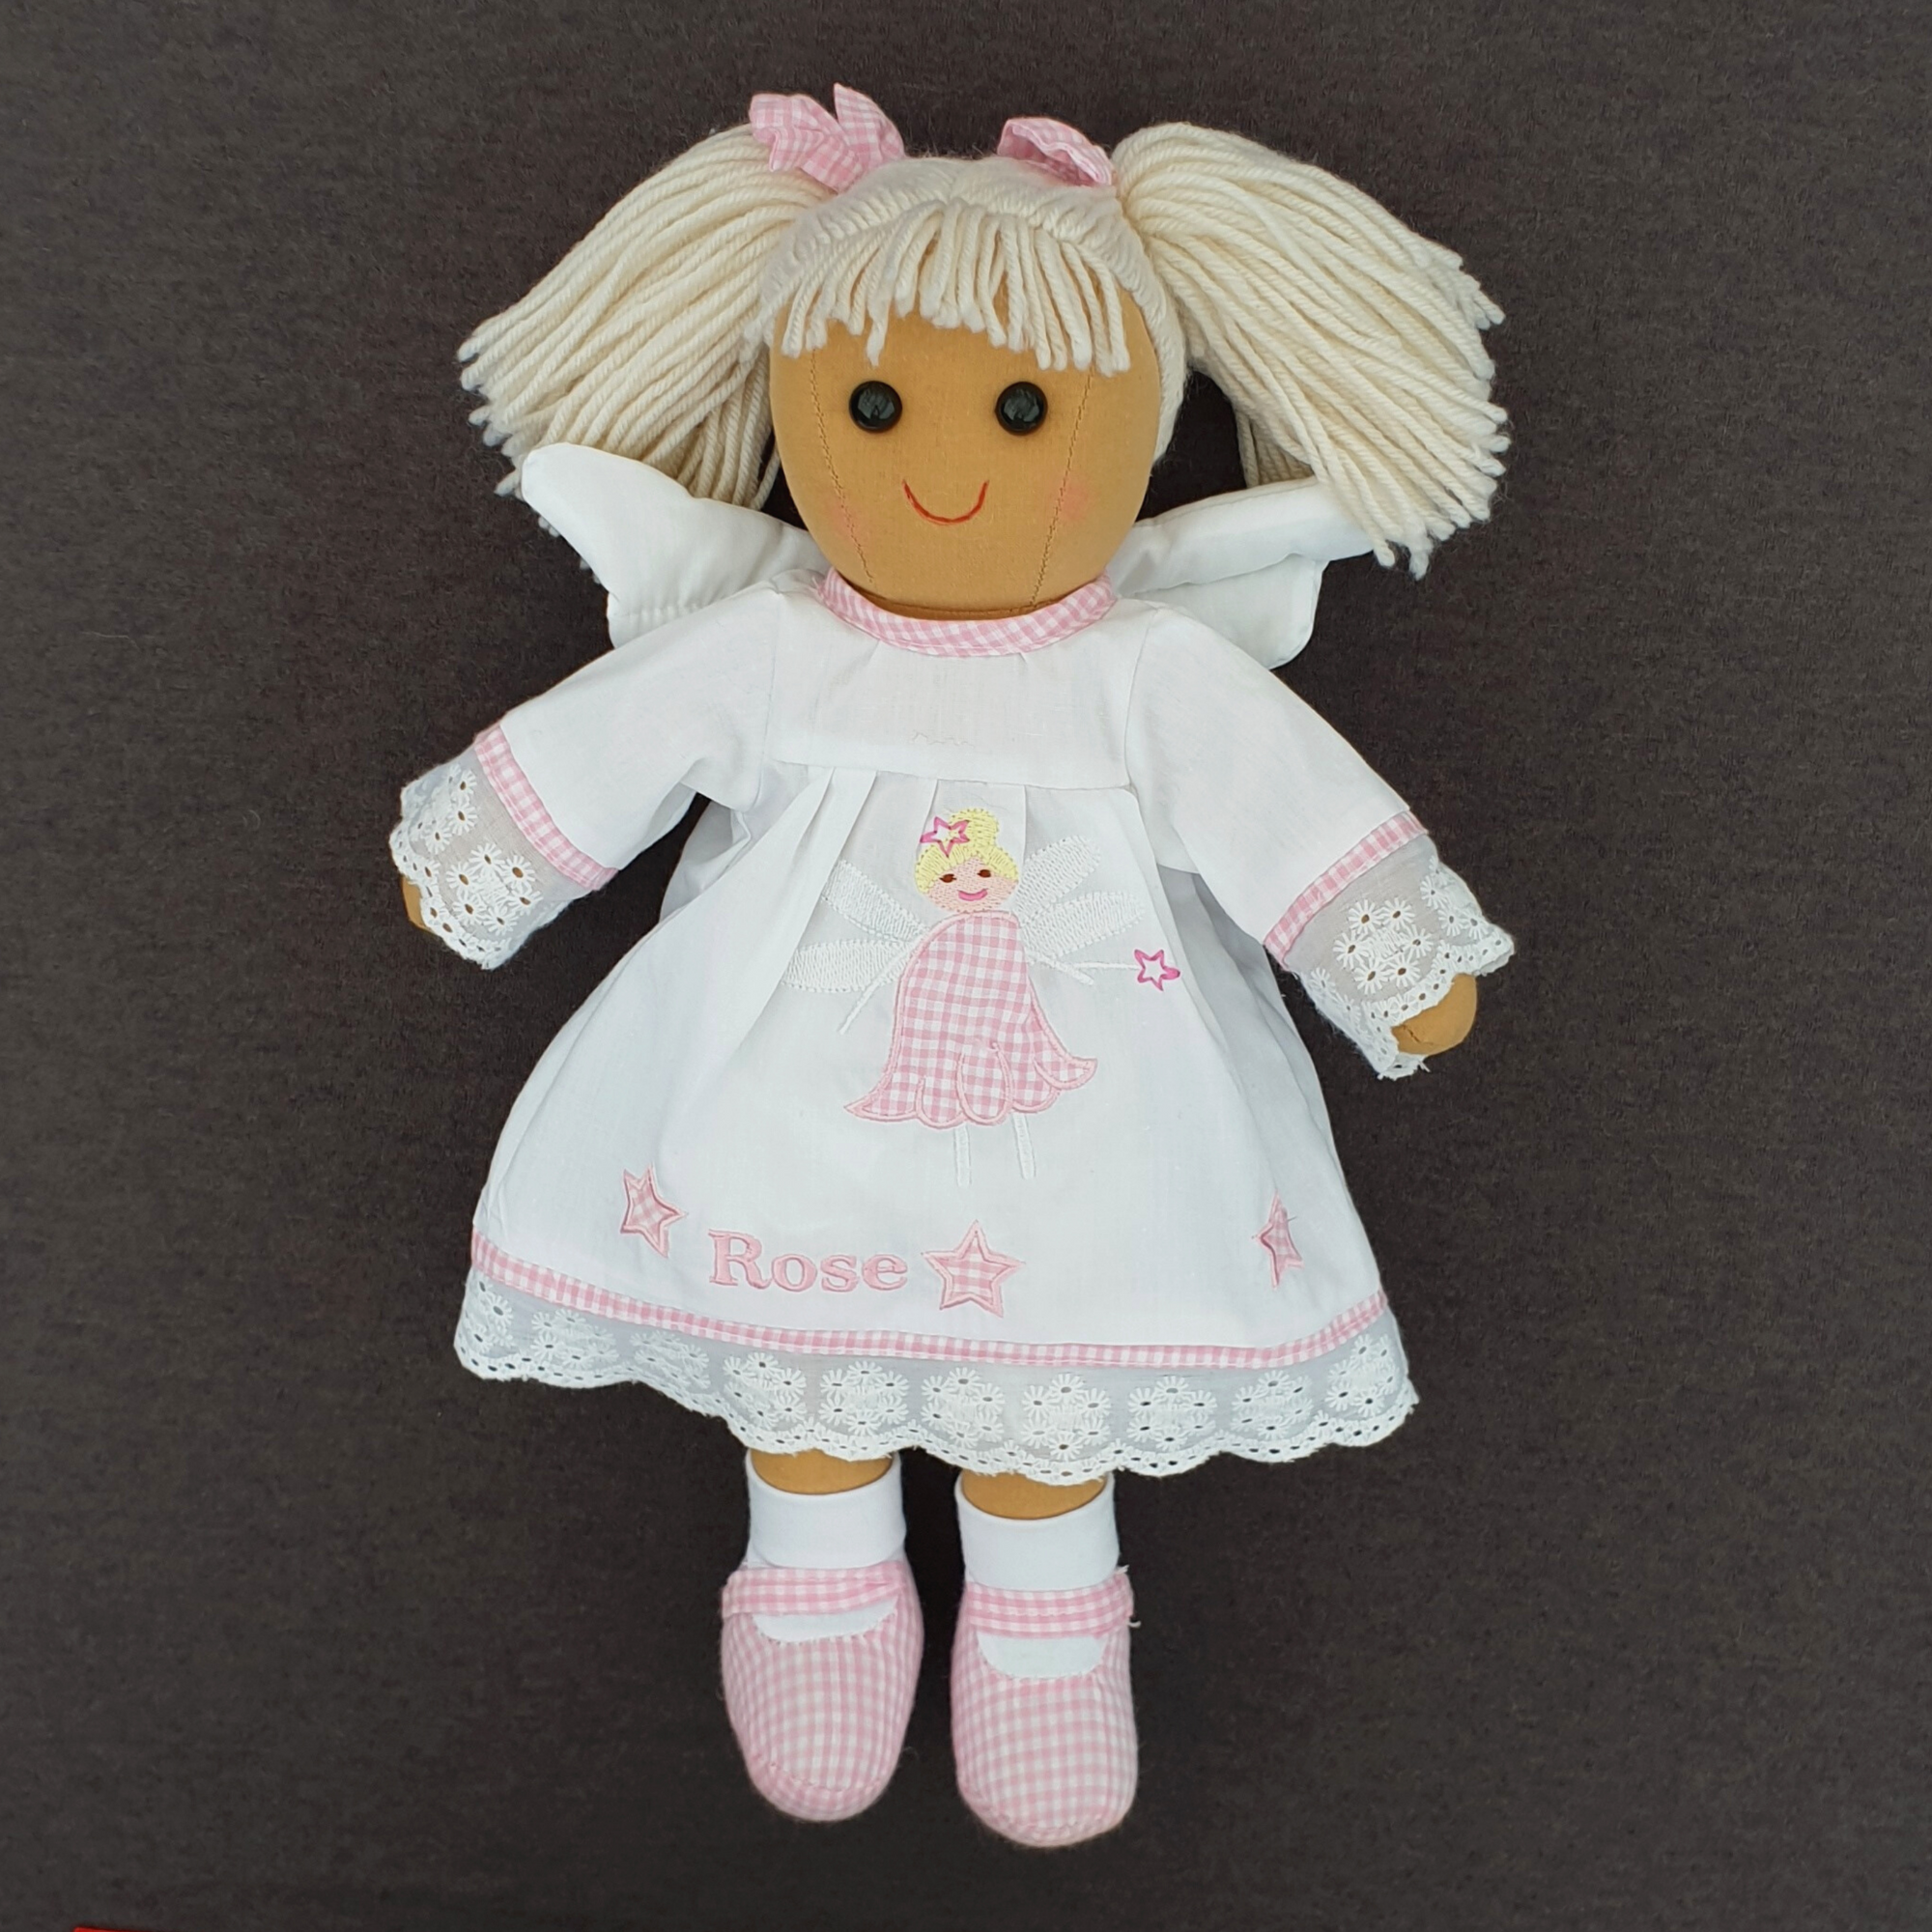 Personalised fairy ragdoll. This ragdoll has blonde hair tied in two bunches and is wearing a white dress with pink gingham decoration and she has fairy wings on her back. The dress can be personalised with a name of your choice of up to 6 characters.